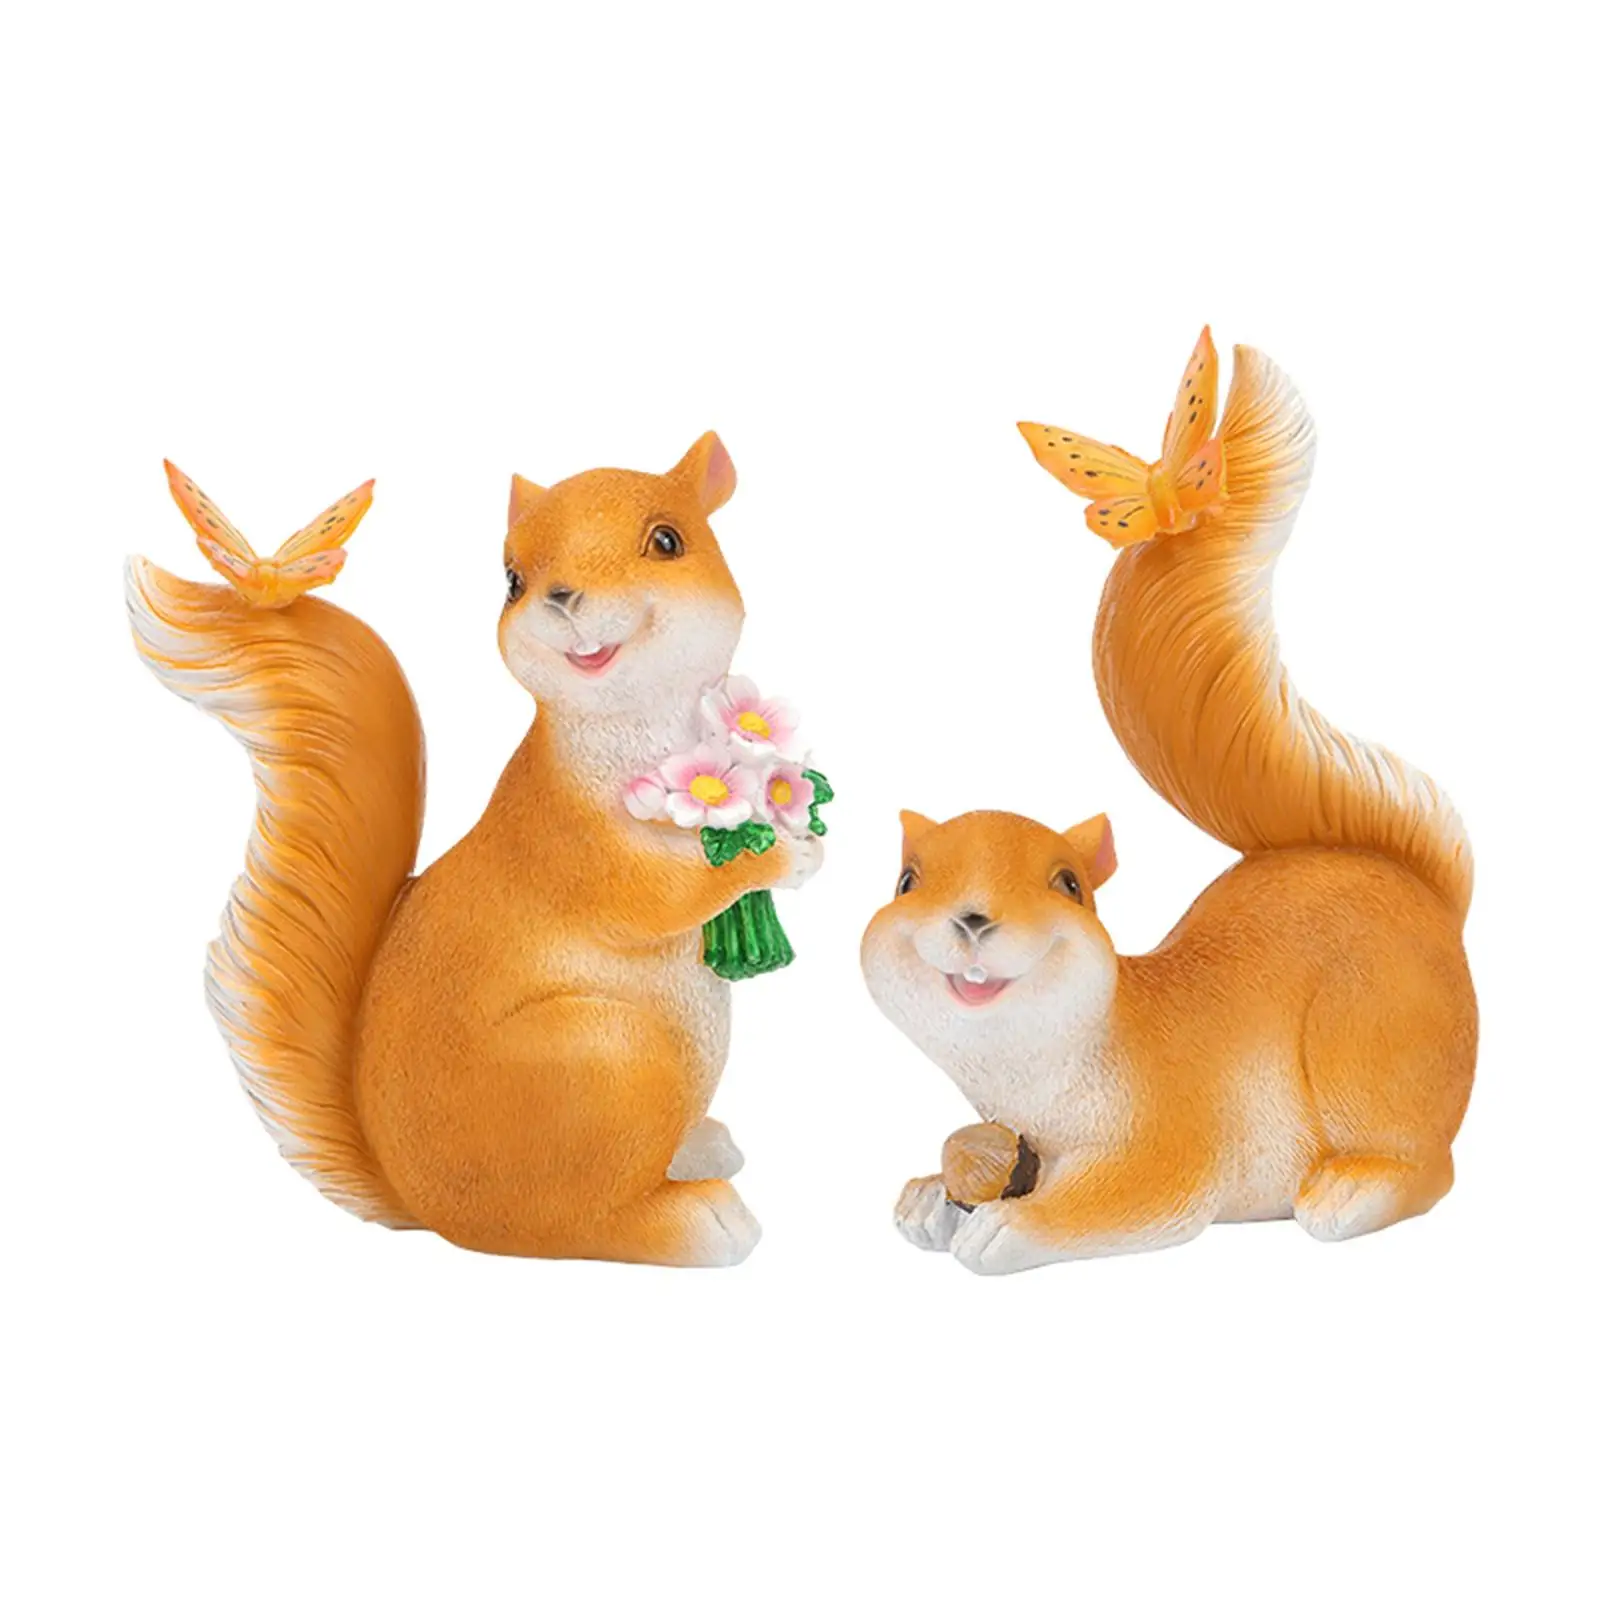 Resin Garden Squirrel Statues with Butterfly Solar Light Handpainted Animal